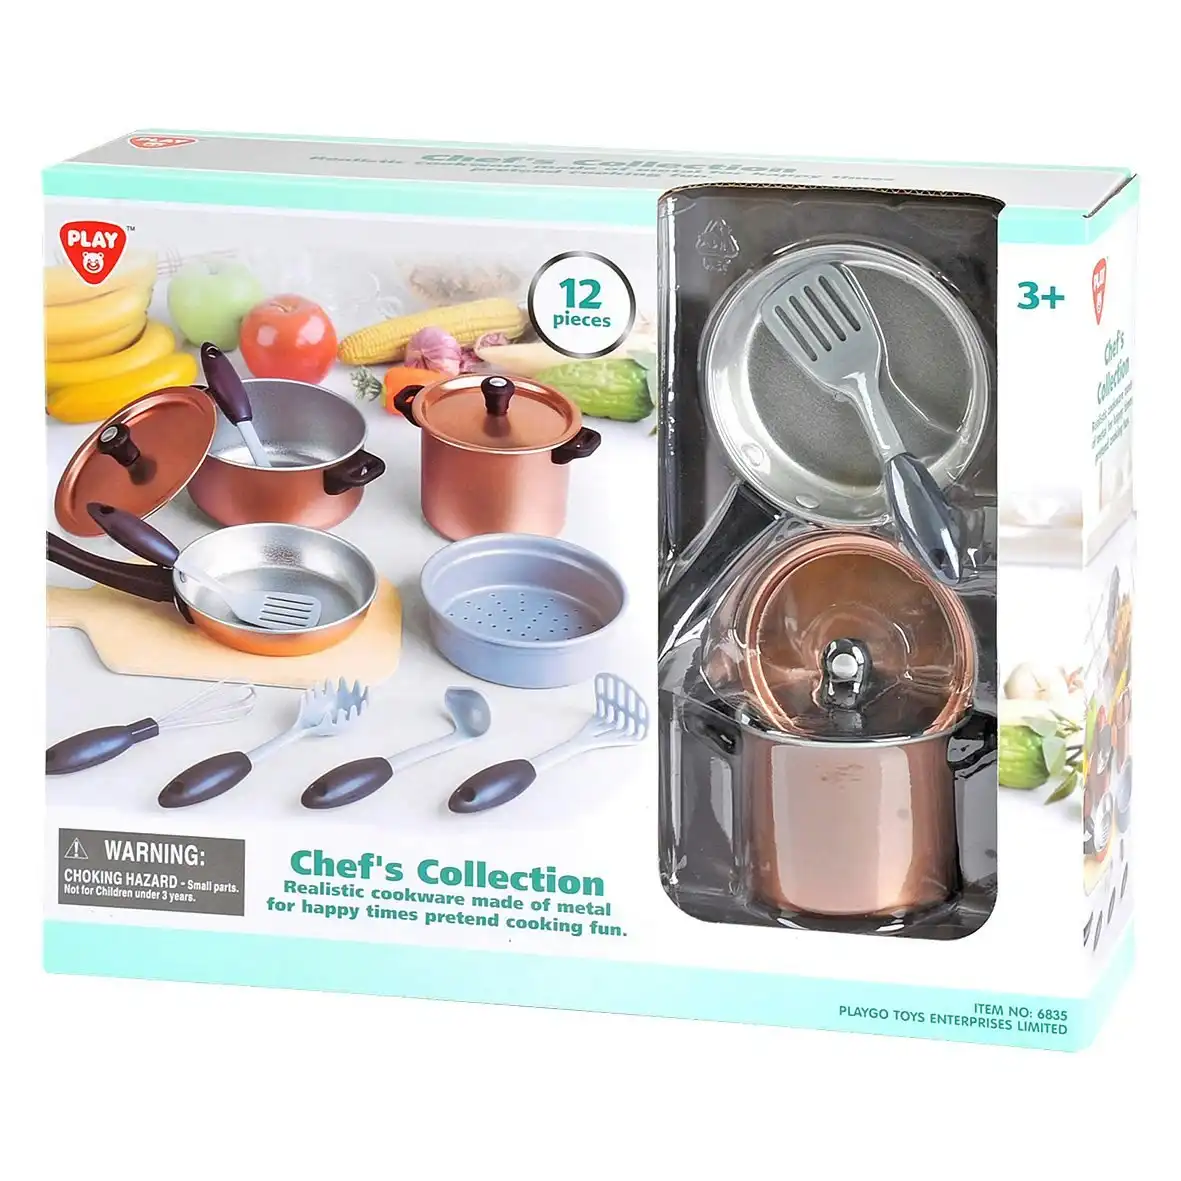 Chefs Collection Metal  Playgo Toys Ent. Ltd